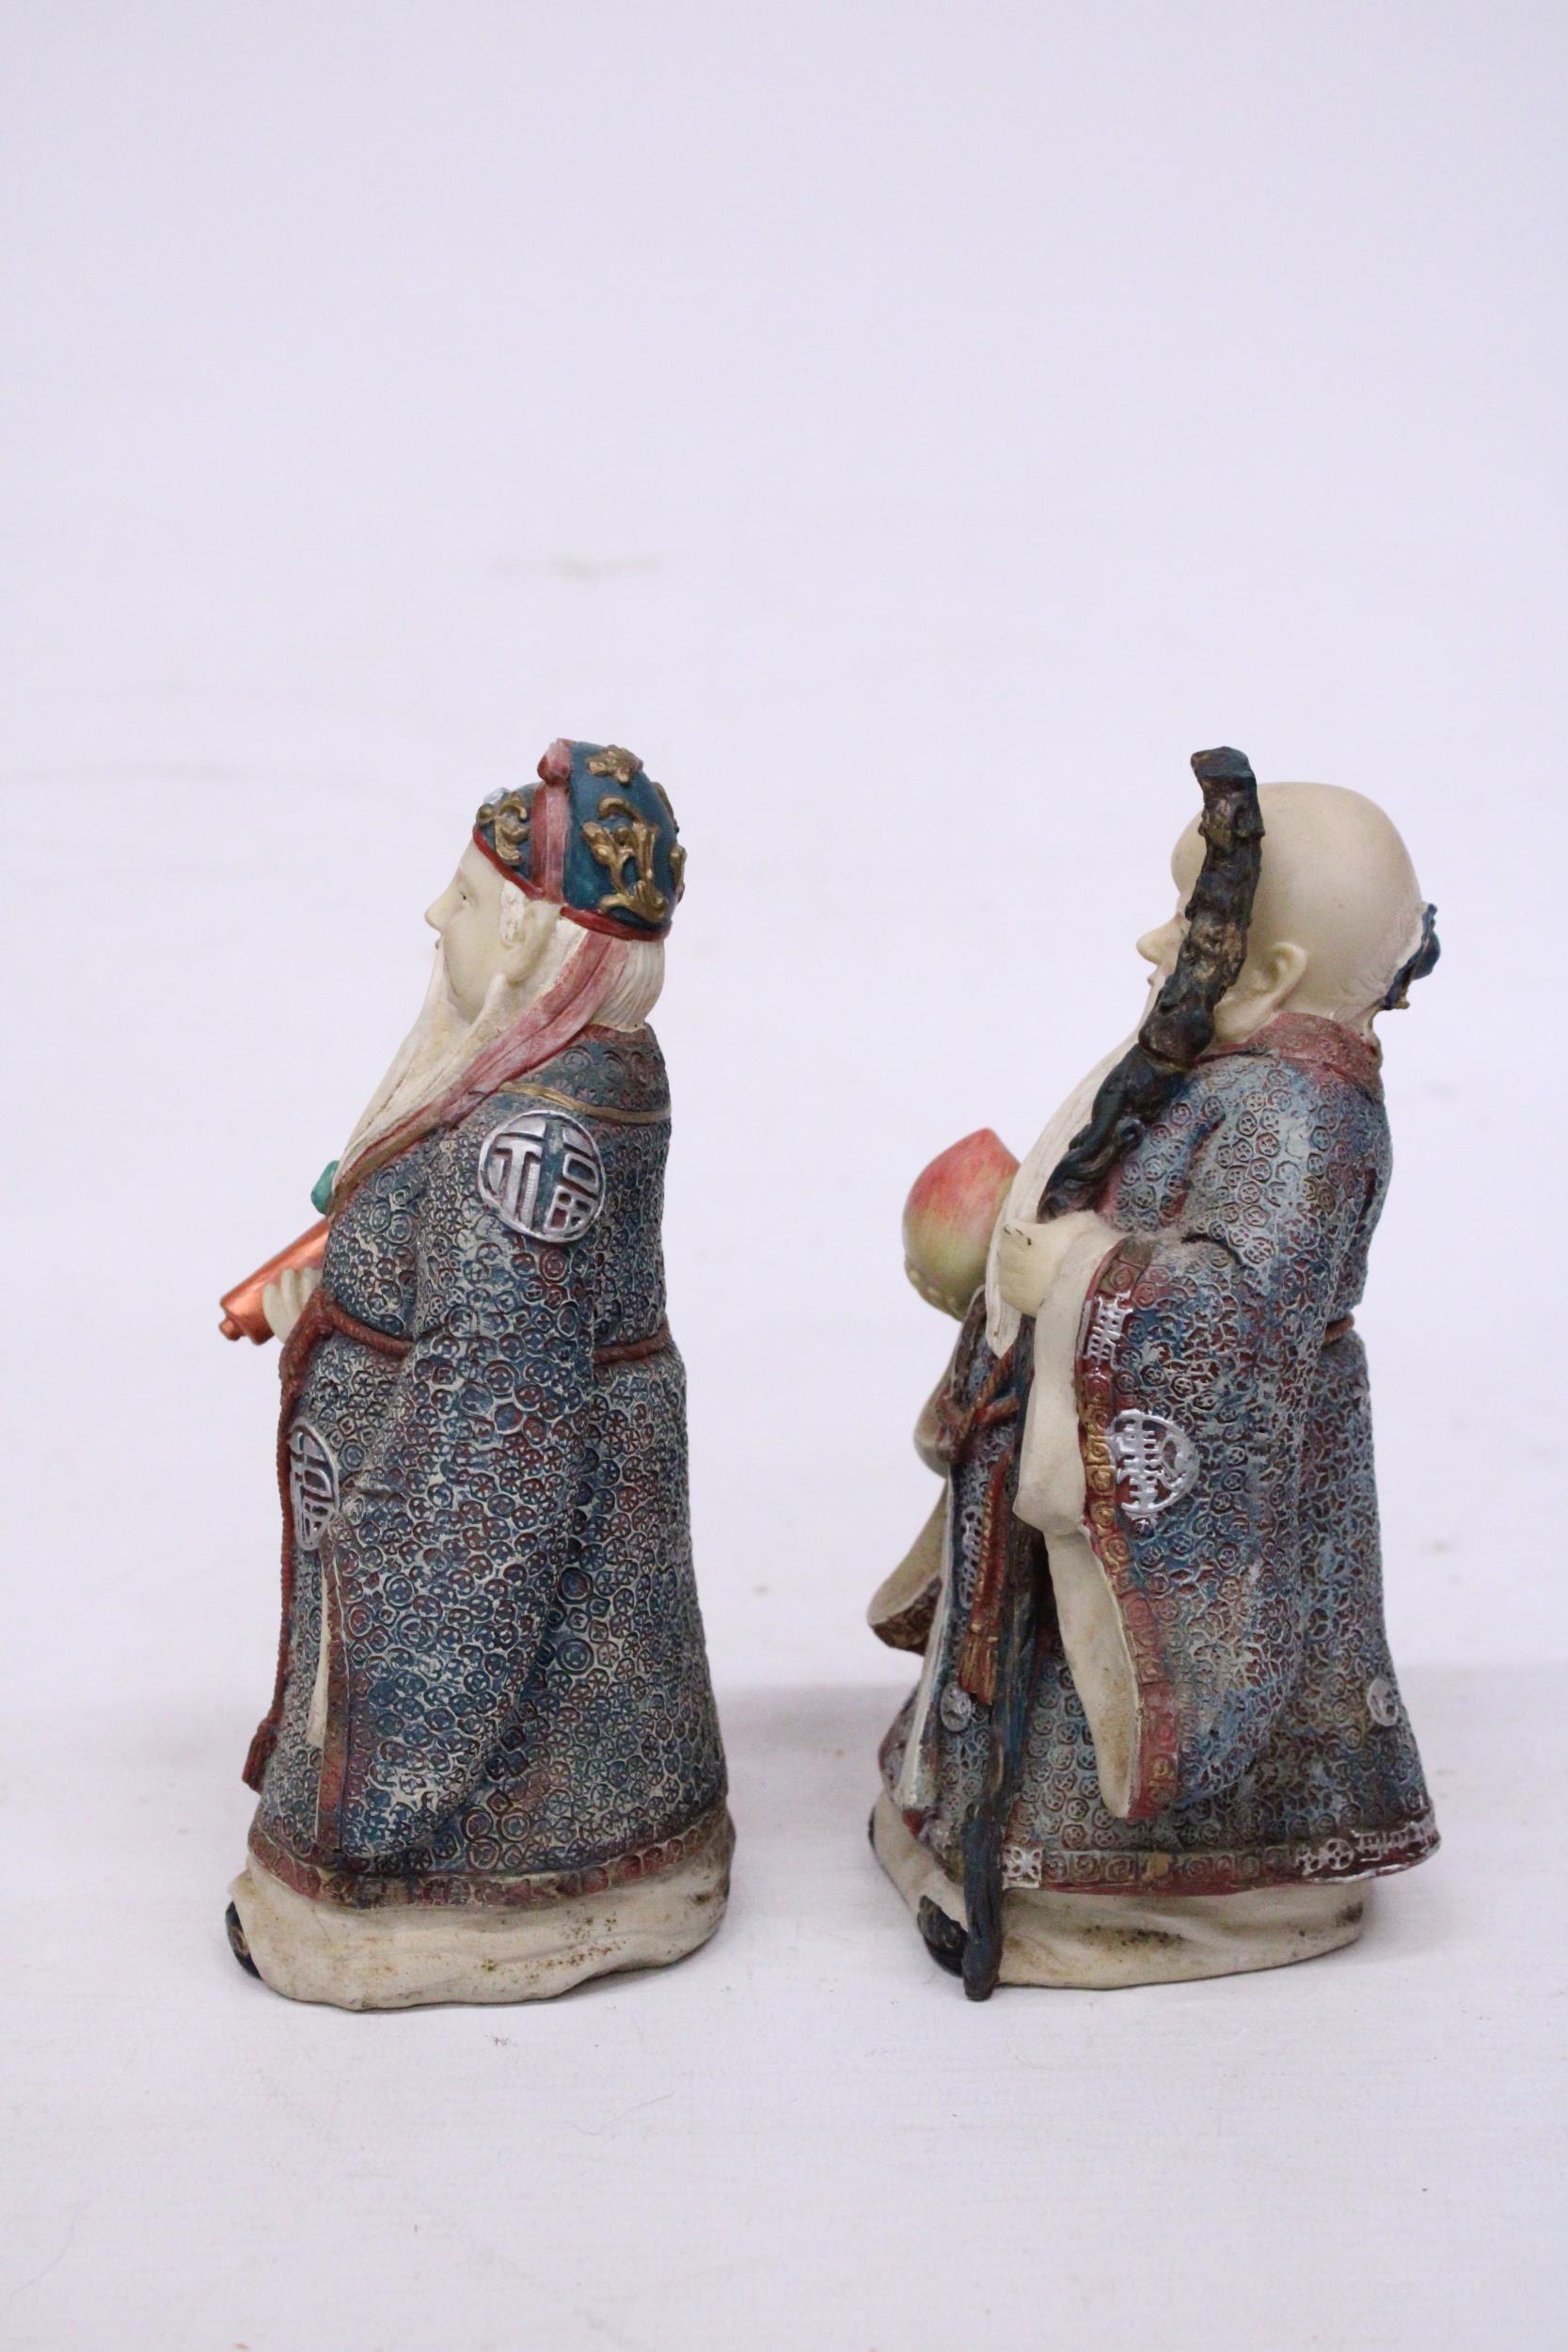 TWO HEAVY STONE MANDARIN FIGURES - 7 INCH (H) - Image 2 of 6